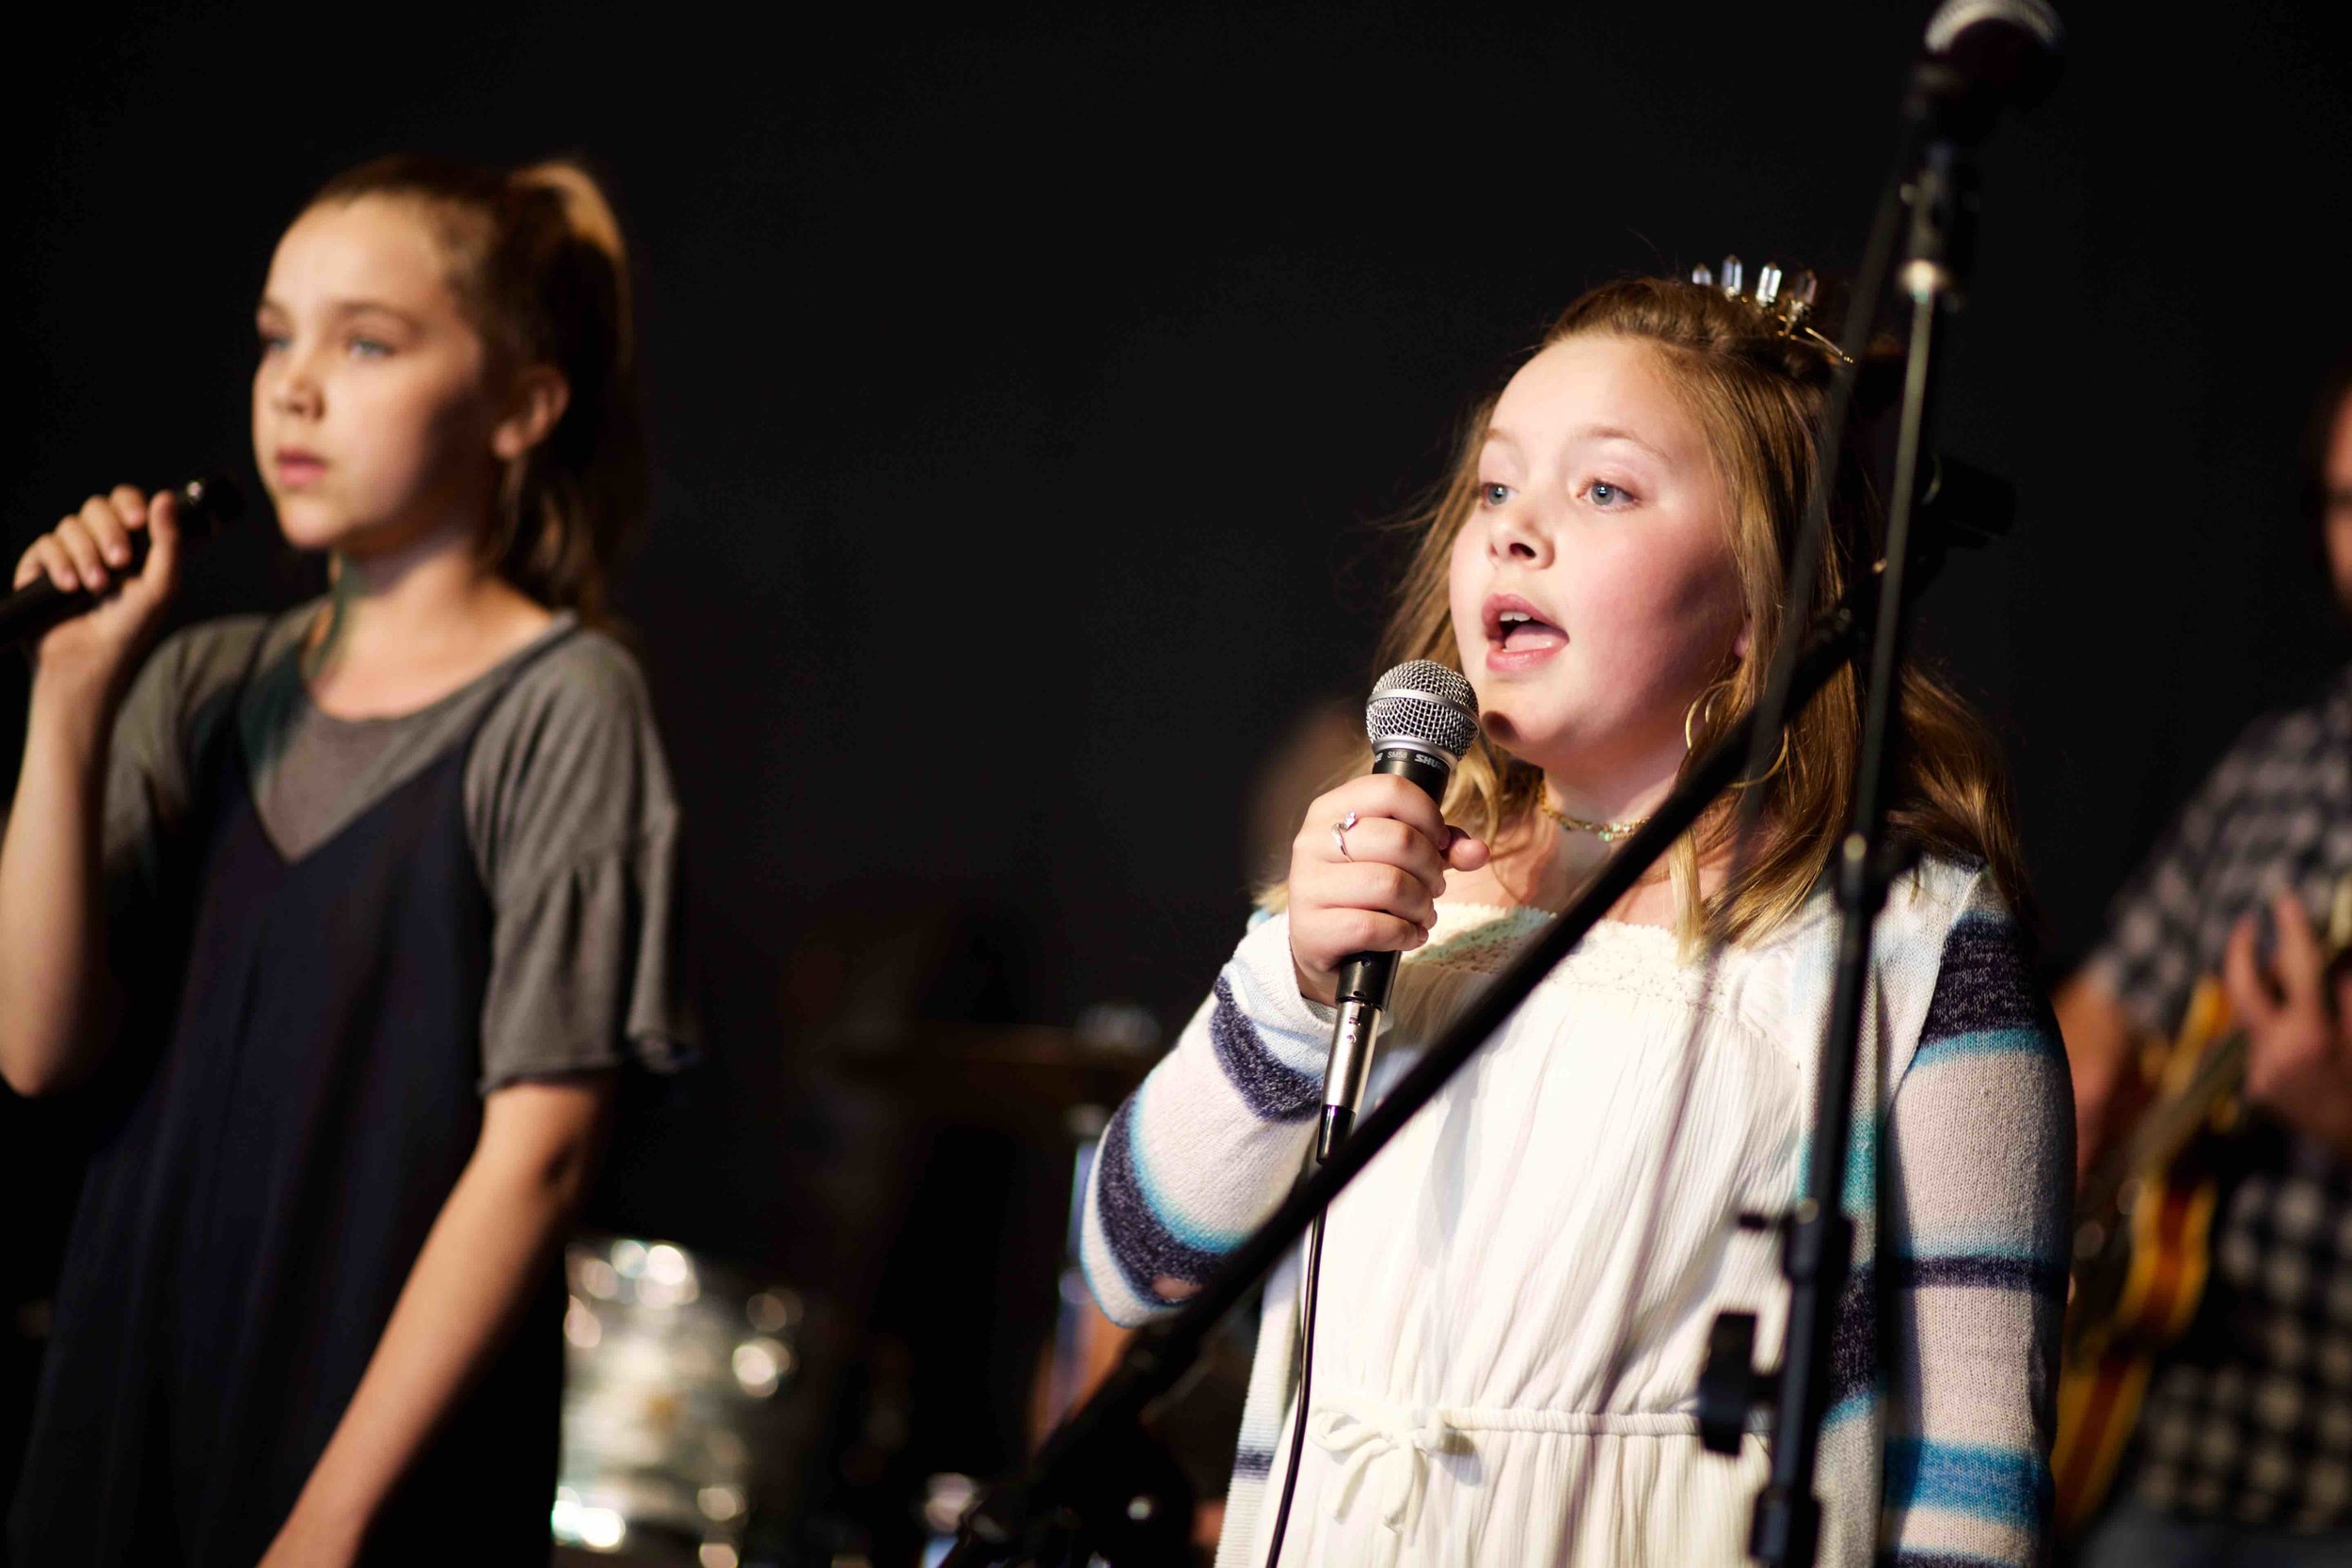 Redmond singing lessons for kids, teens, and adults at Cascade Voice Academy (formerly Issaquah Voice Studio)